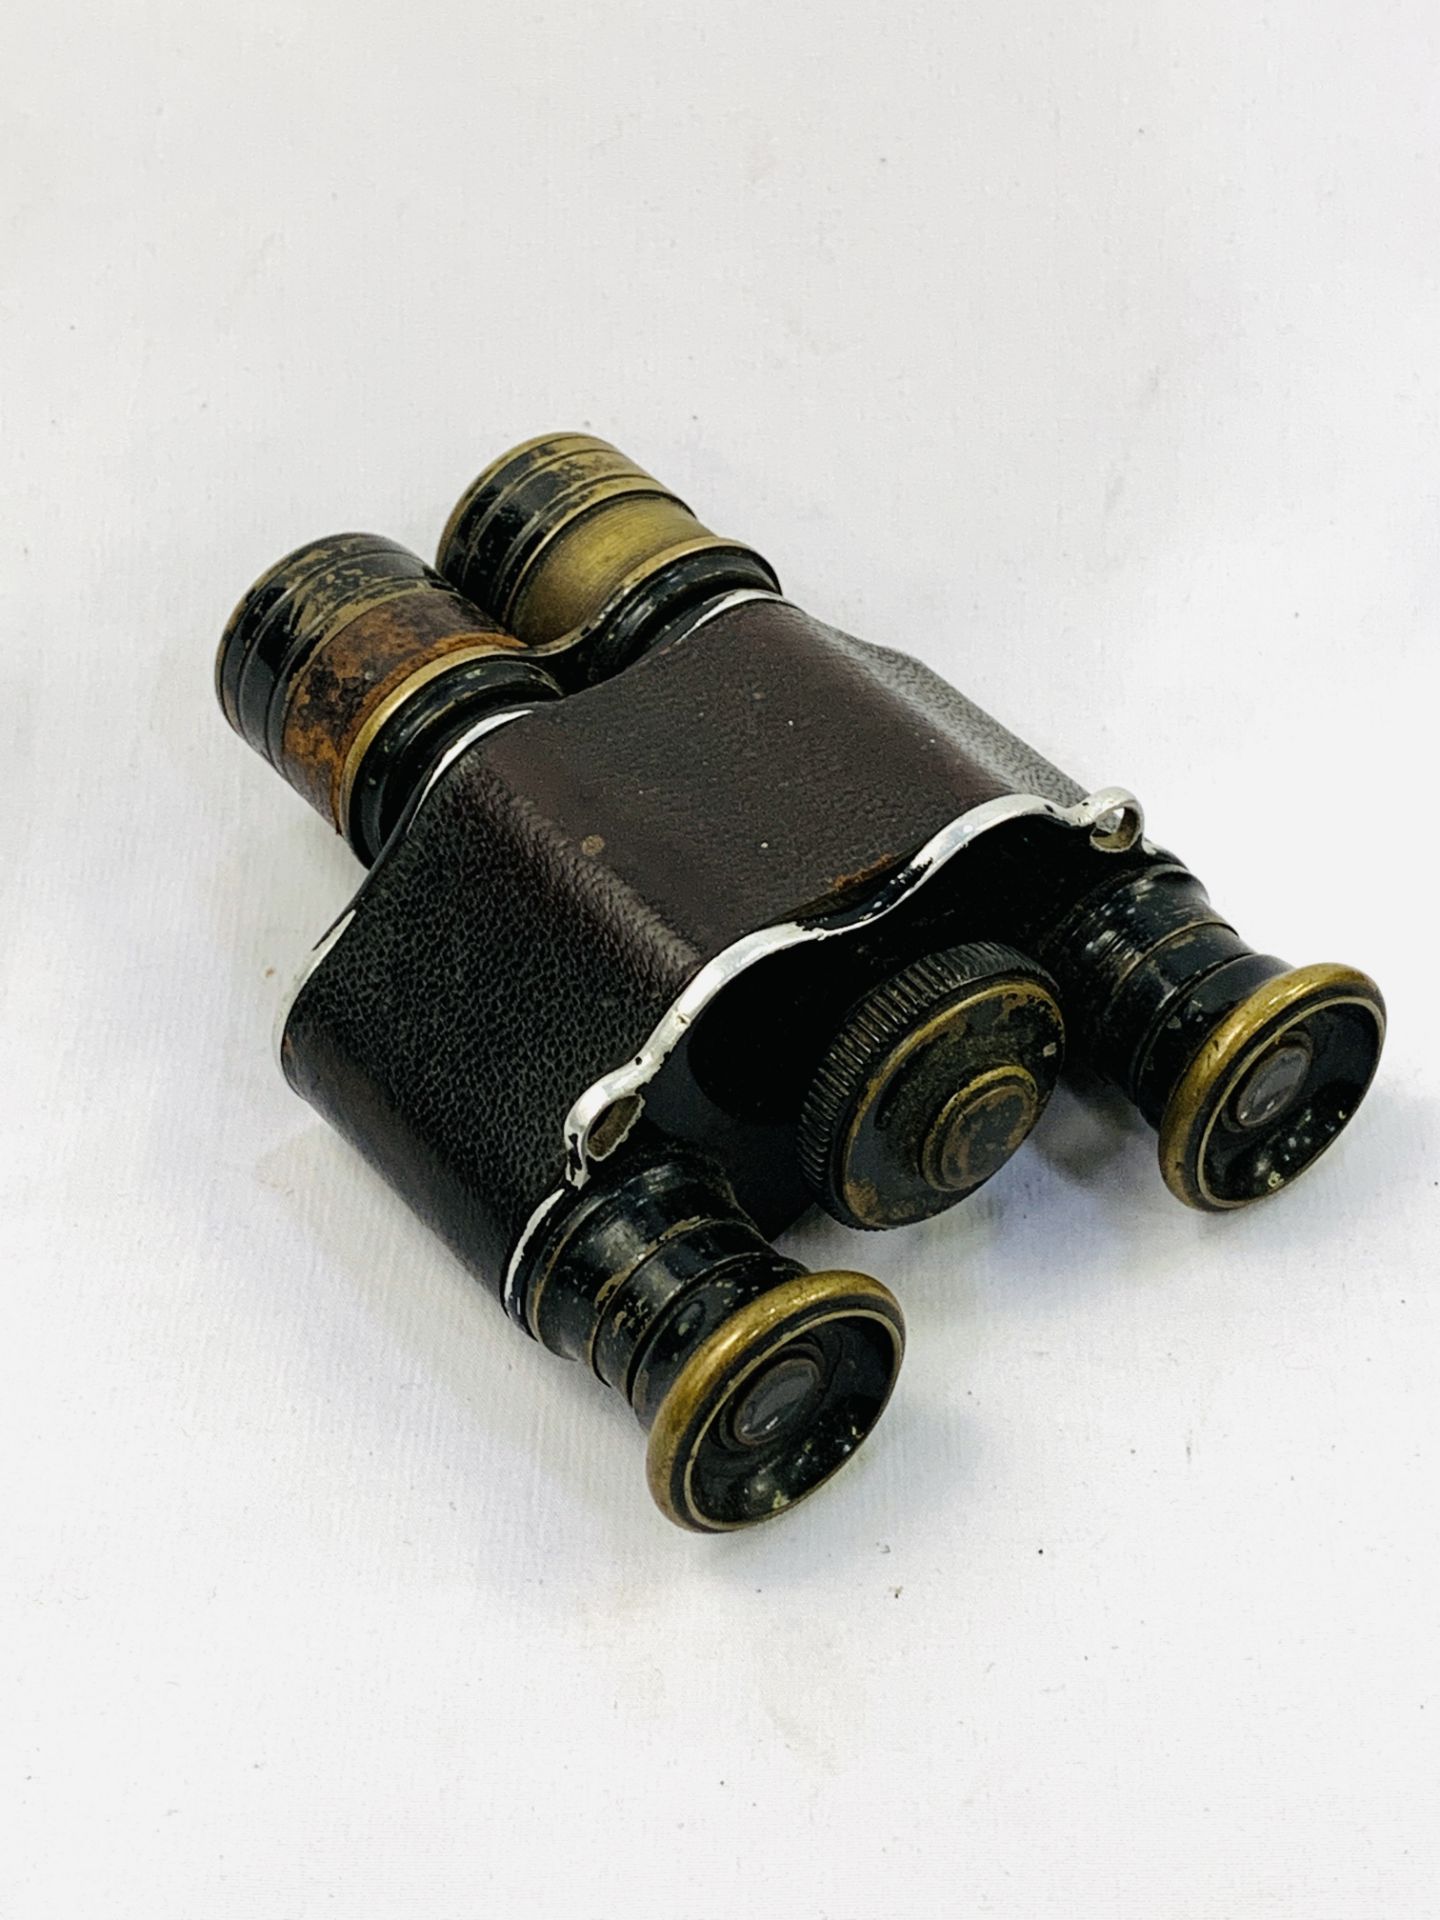 Early 20th Century leather covered binoculars by Aitchison in original brown leather case - Image 2 of 3